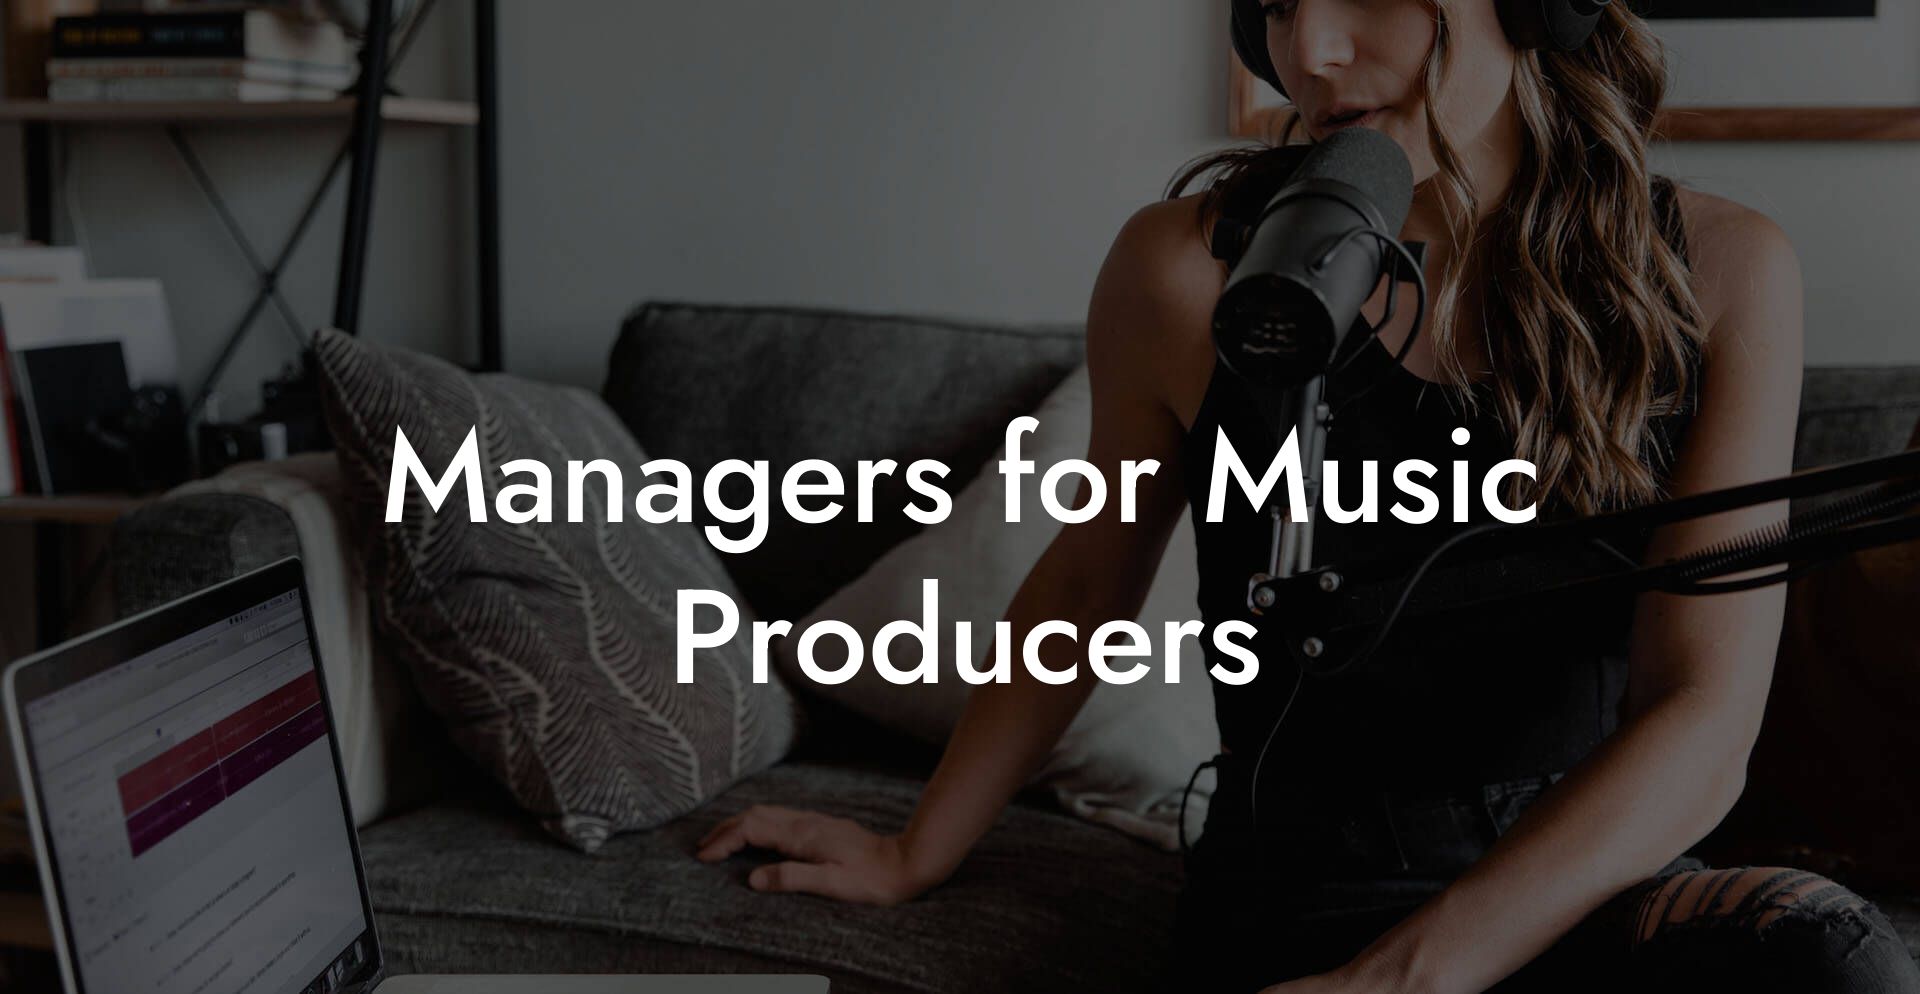 Managers for Music Producers